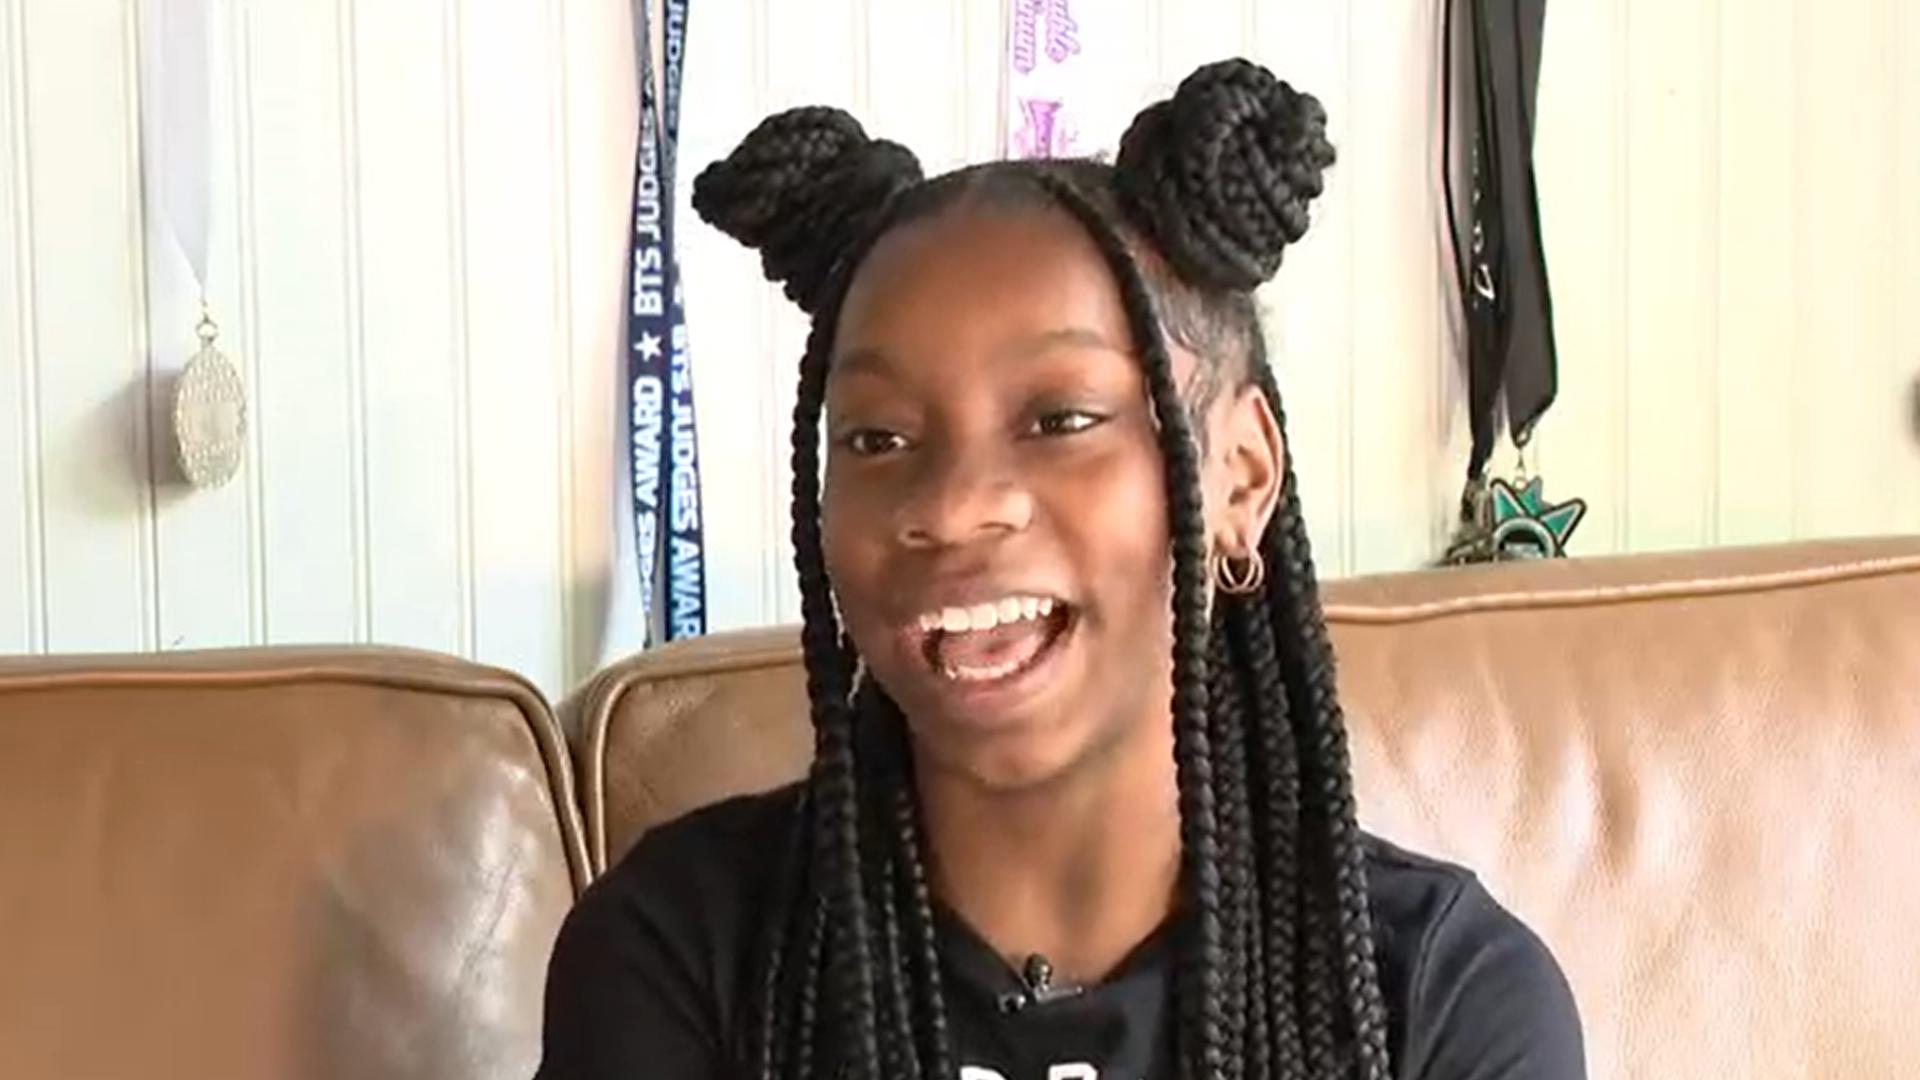 Nylah Walker is an award-winning dancer from St. Louis. She is hoping to raise money to perform at a national competition.